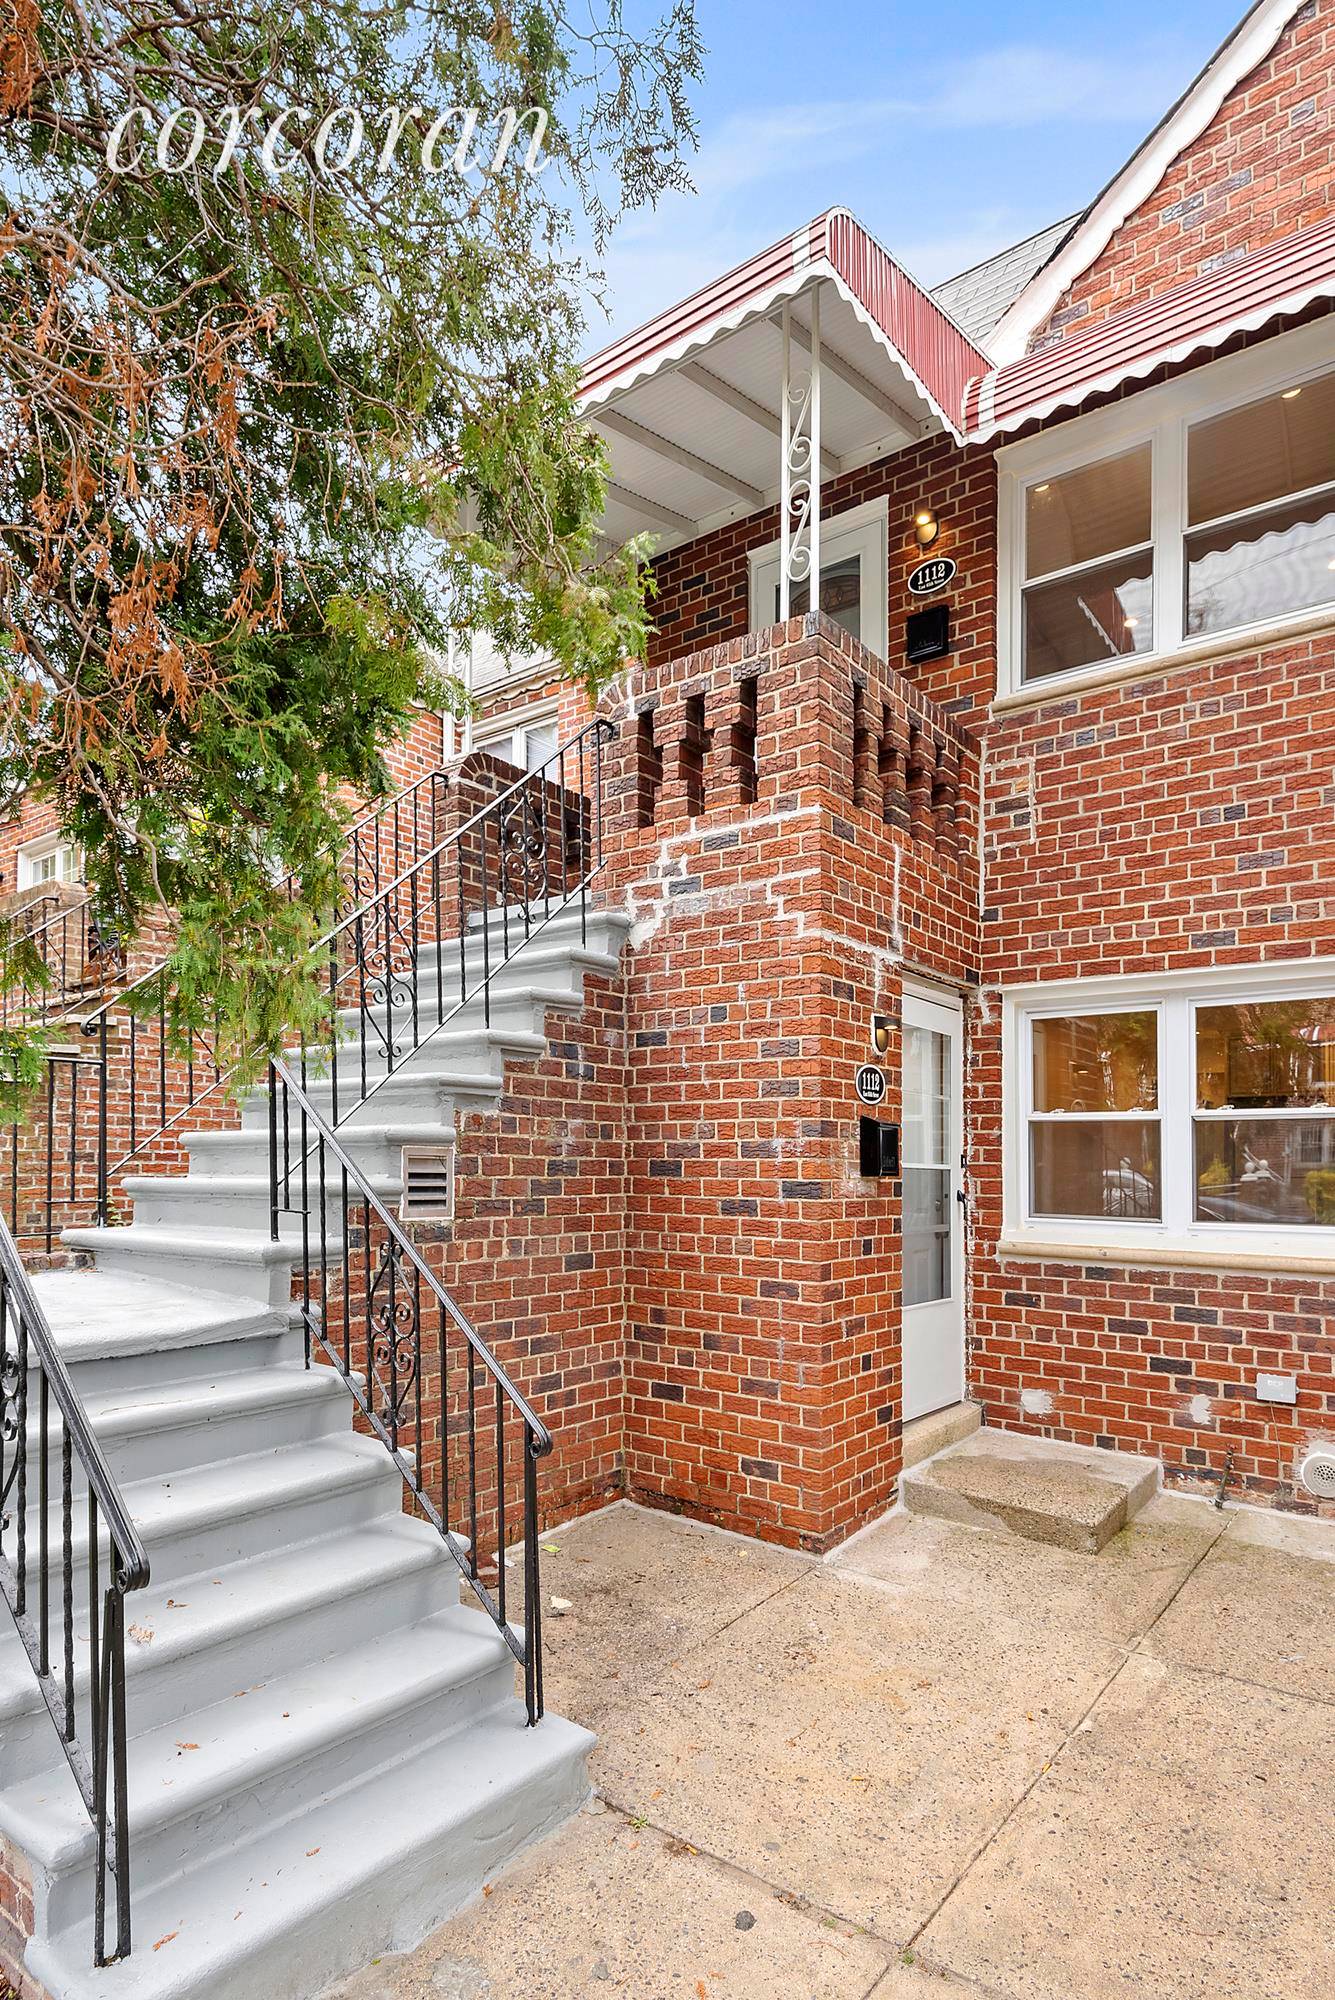 This 2 family stunner brick beauty checks all the boxes !